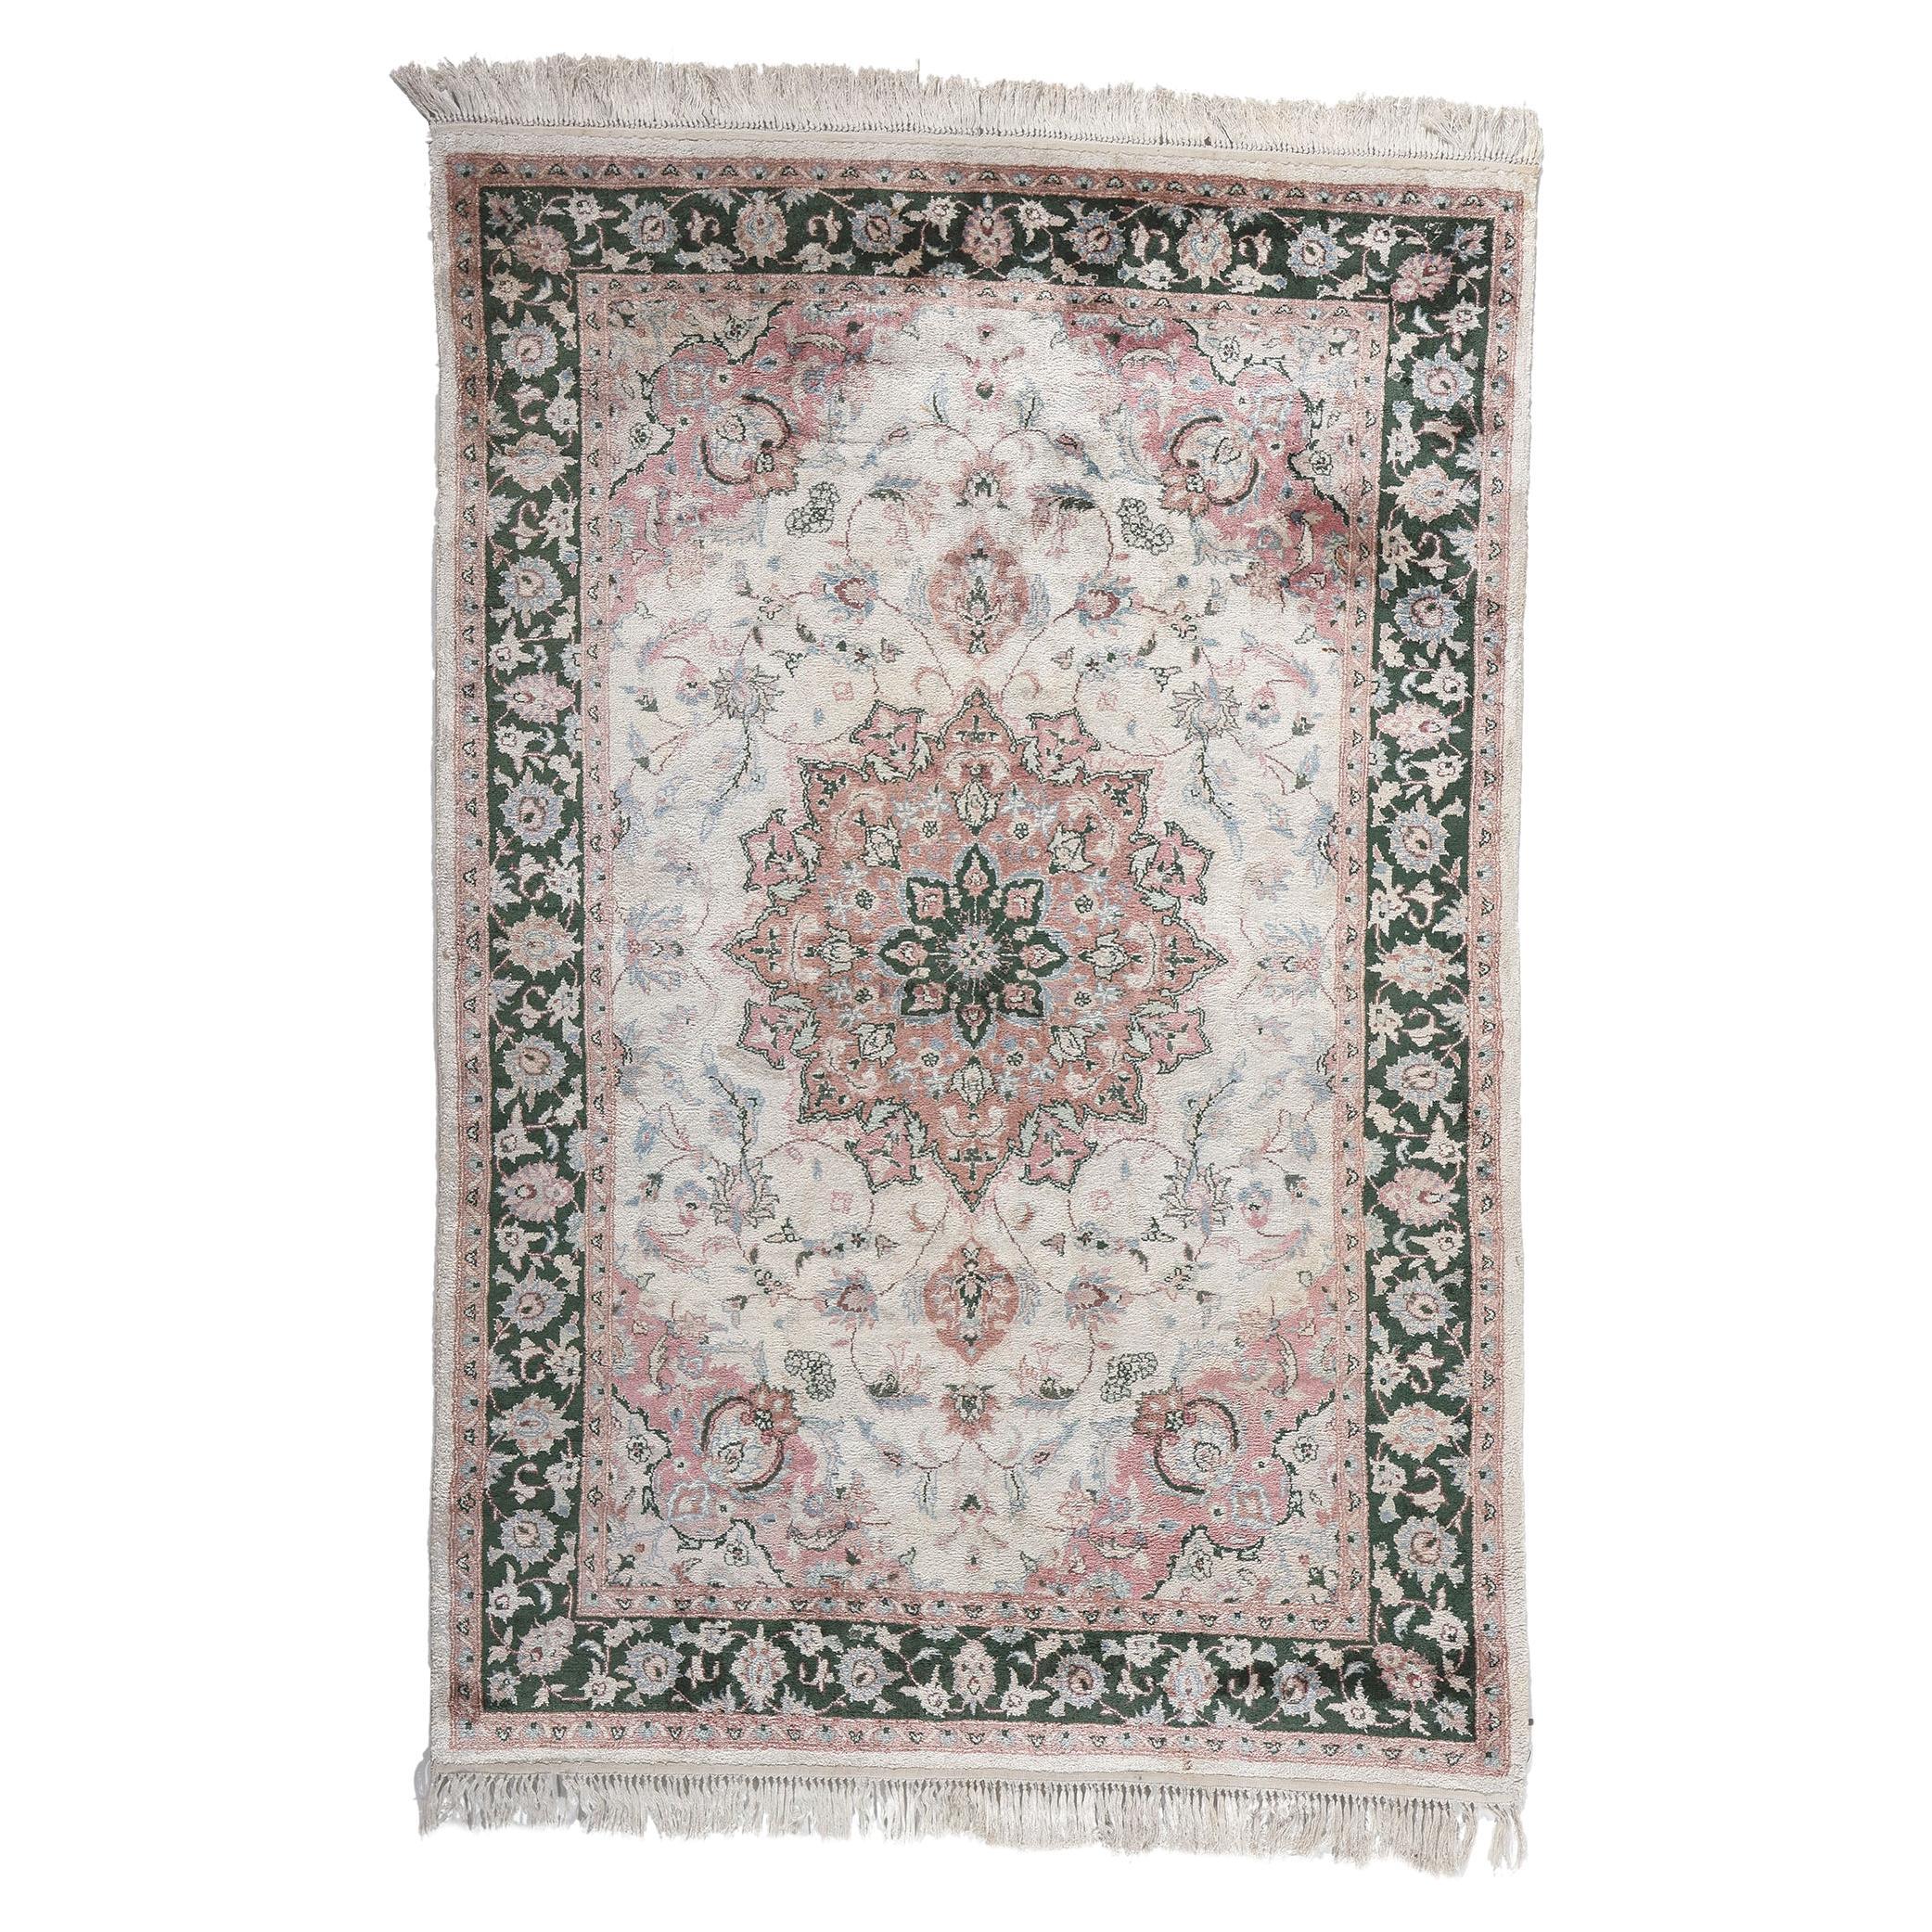 Vintage Silk Kashmir Rug, English Country Meets Luxe Style